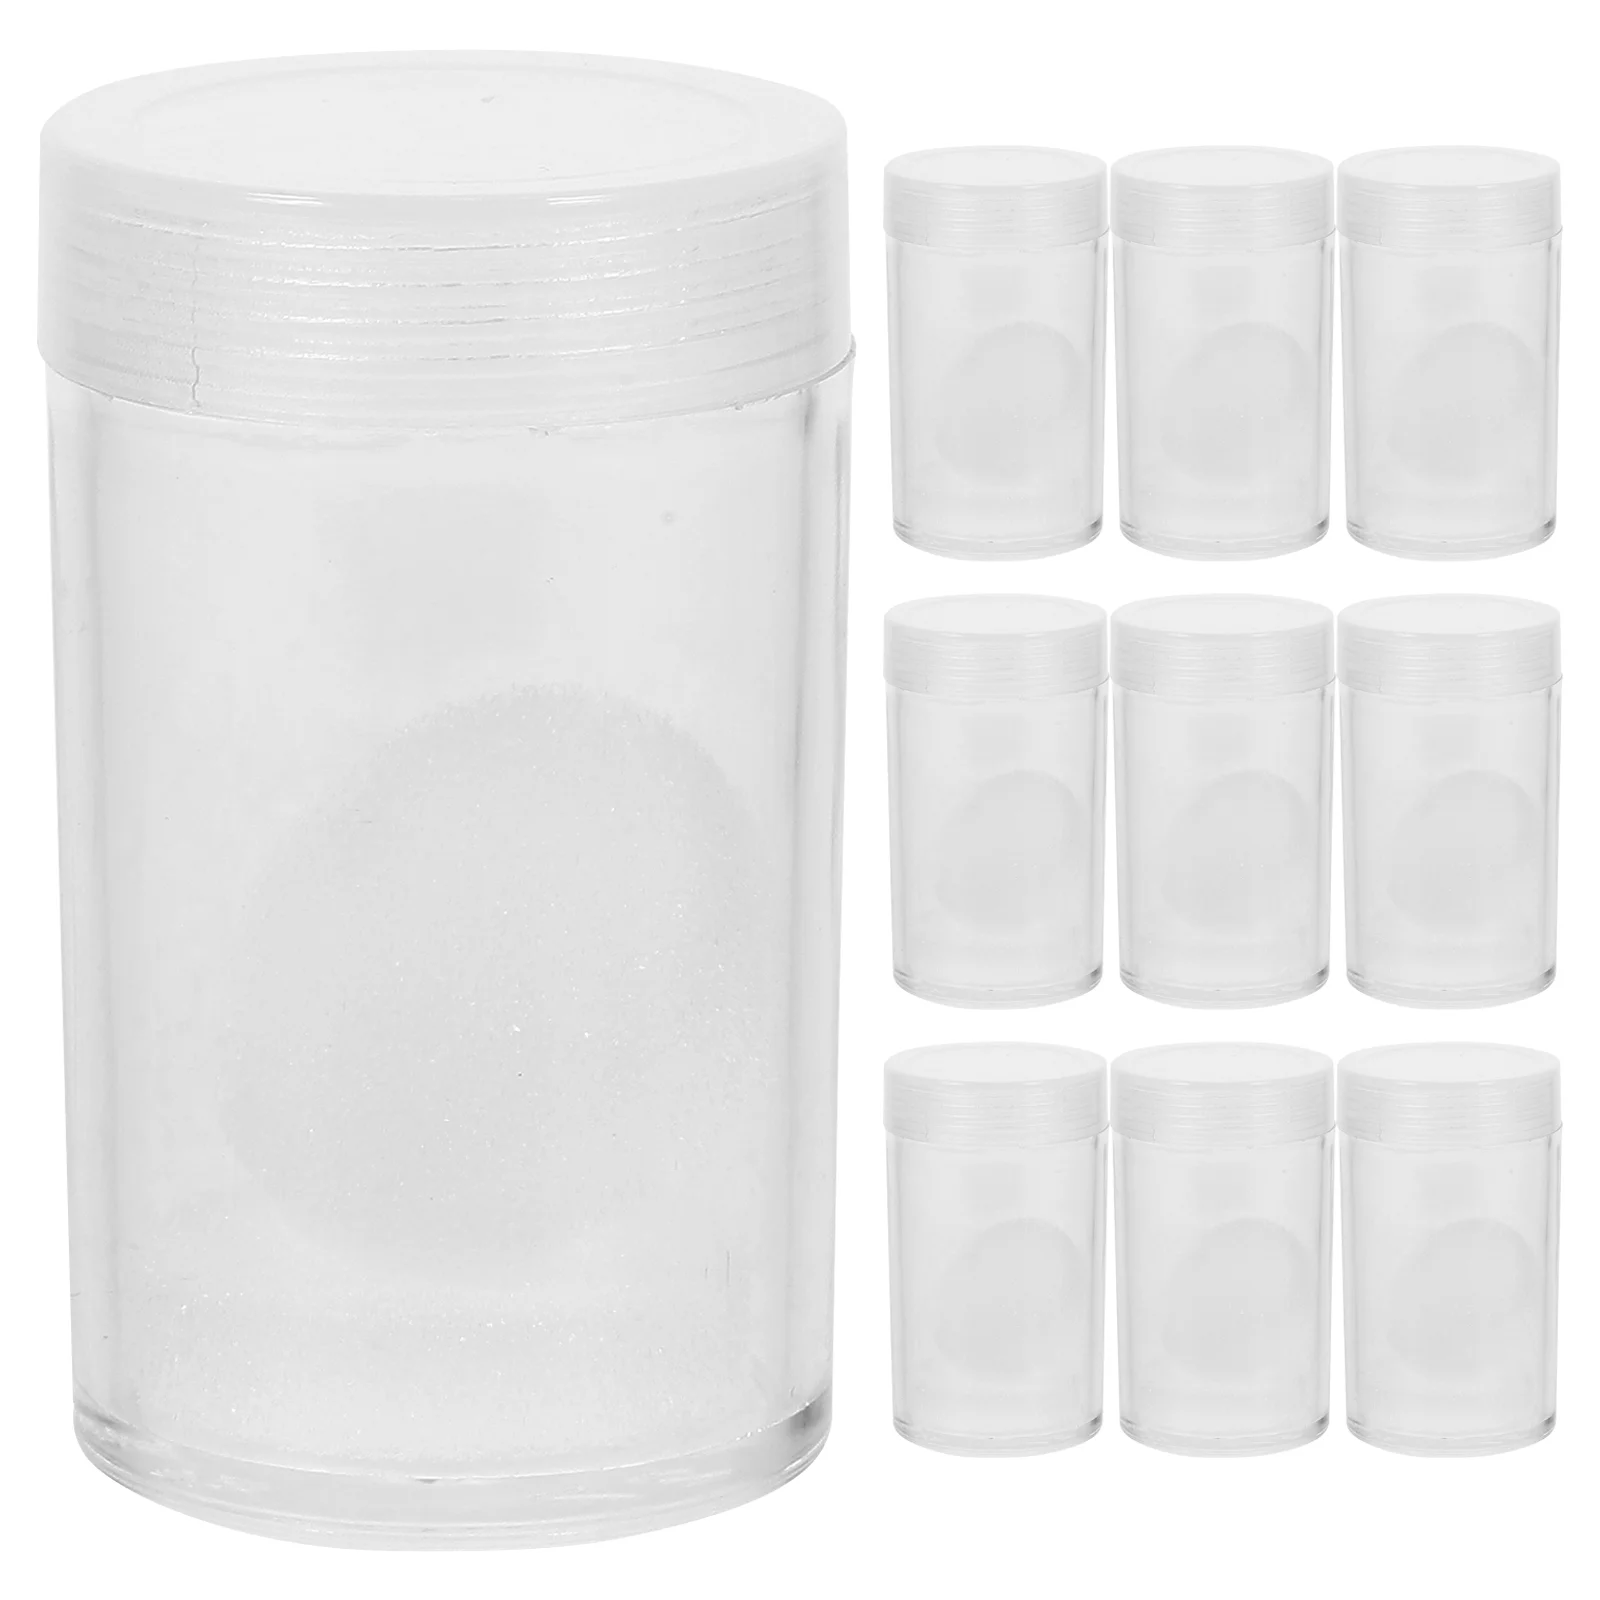 

10pcs Dollar Coin Holders Coins Protectors Clear Coin Storage Case Collections Container